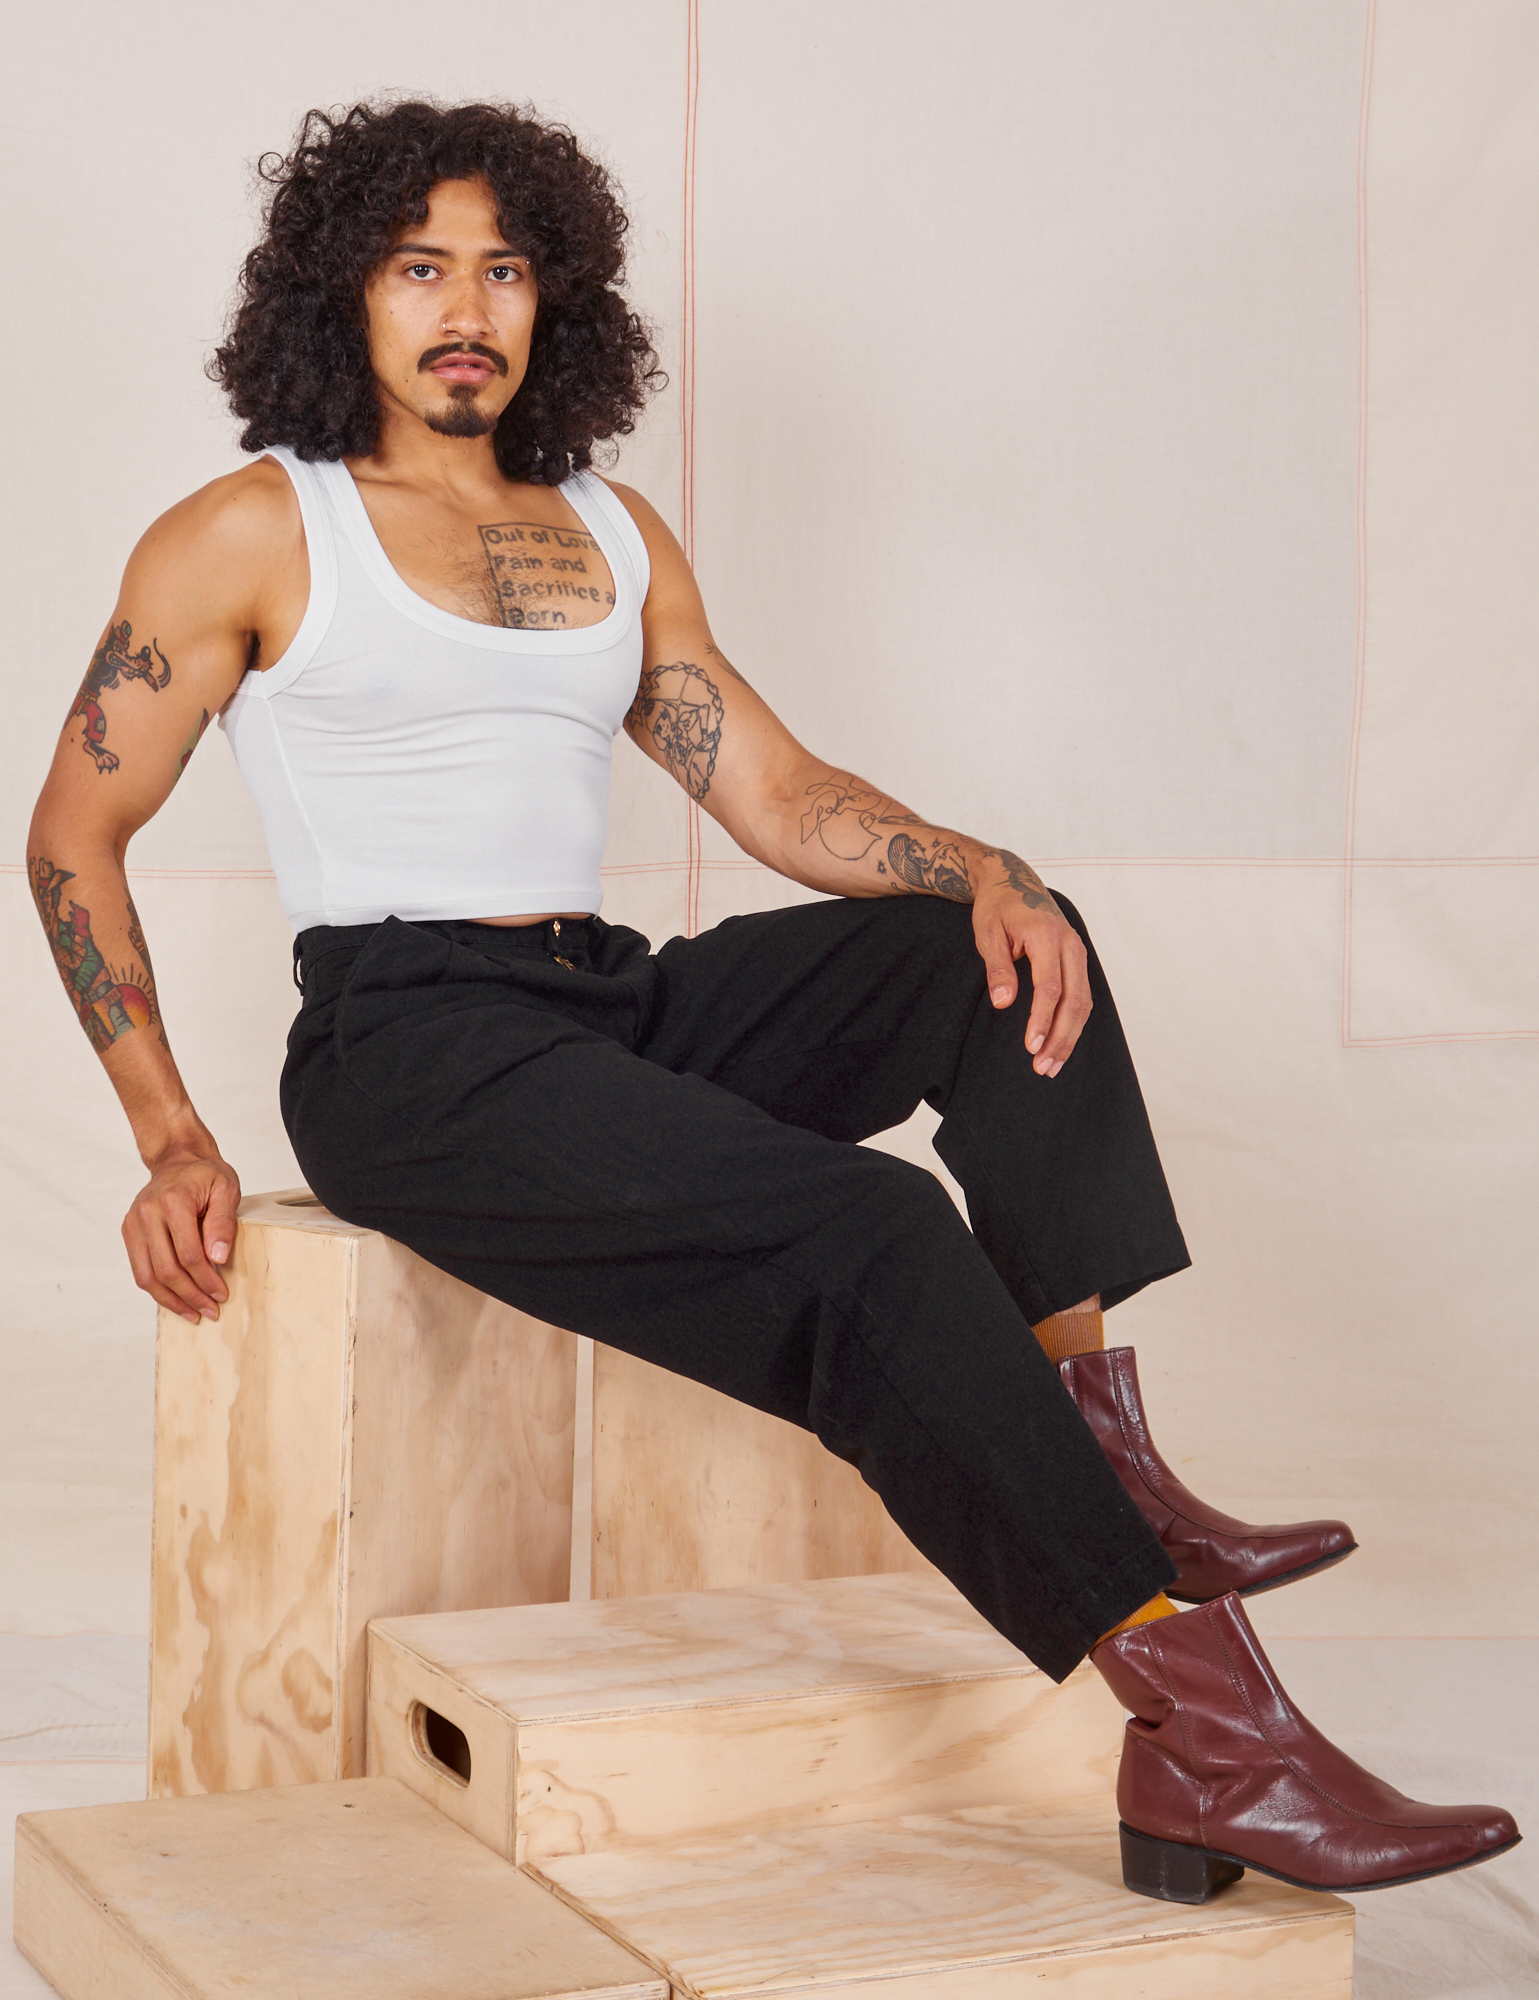 Jesse is sitting on a wooden crate wearing Heavyweight Trousers in Basic Black and Cropped Tank Top in vintage tee off-white